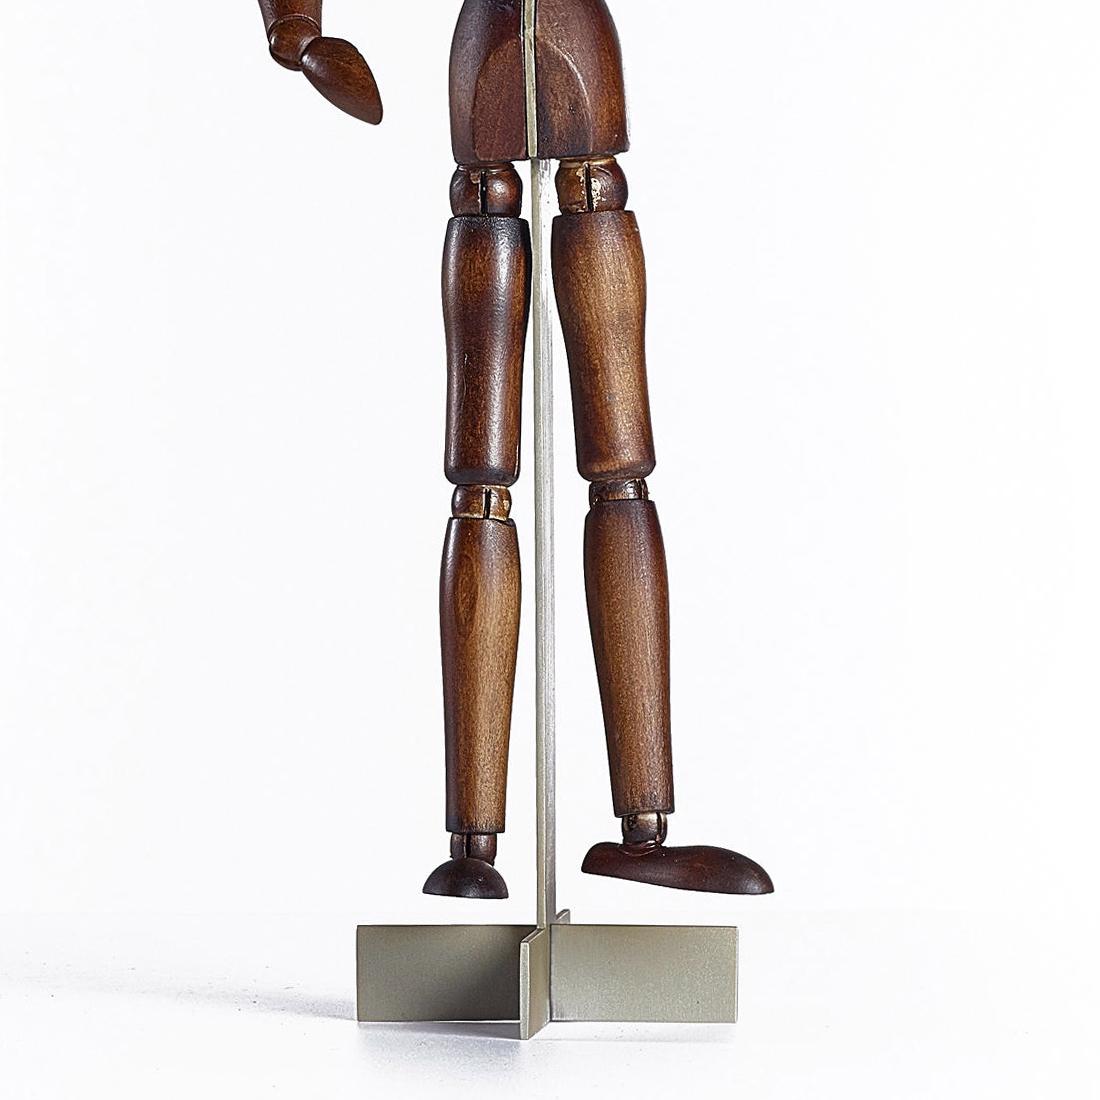 Contemporary Wooden Man Sculpture For Sale